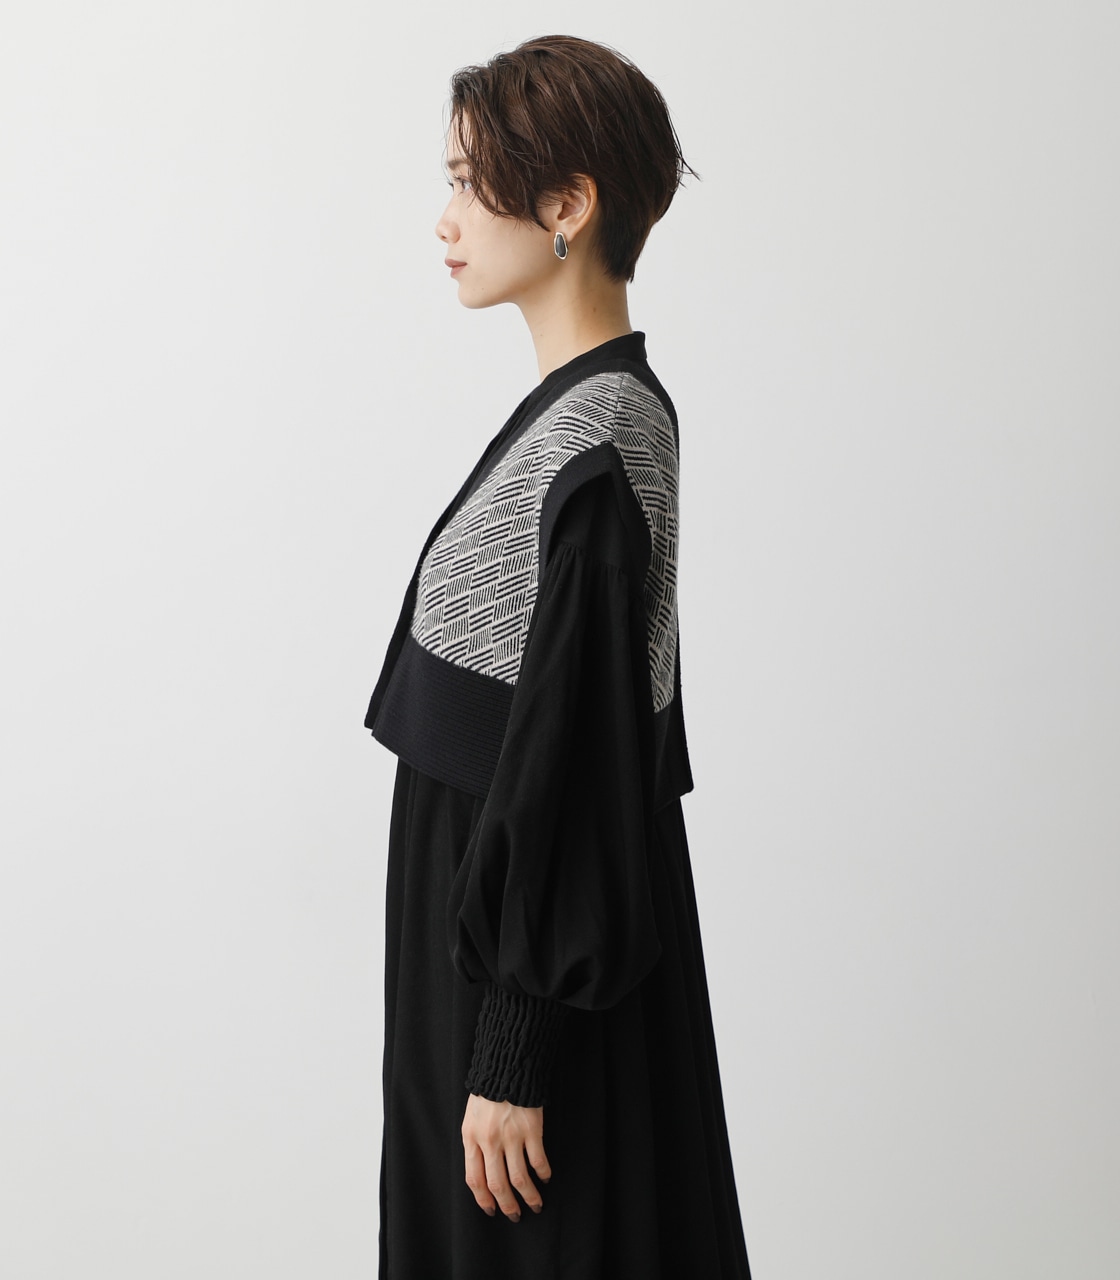 PATTERN COMPACT KNIT VEST/パターンコンパクトニットベスト 詳細画像 柄BLK 6